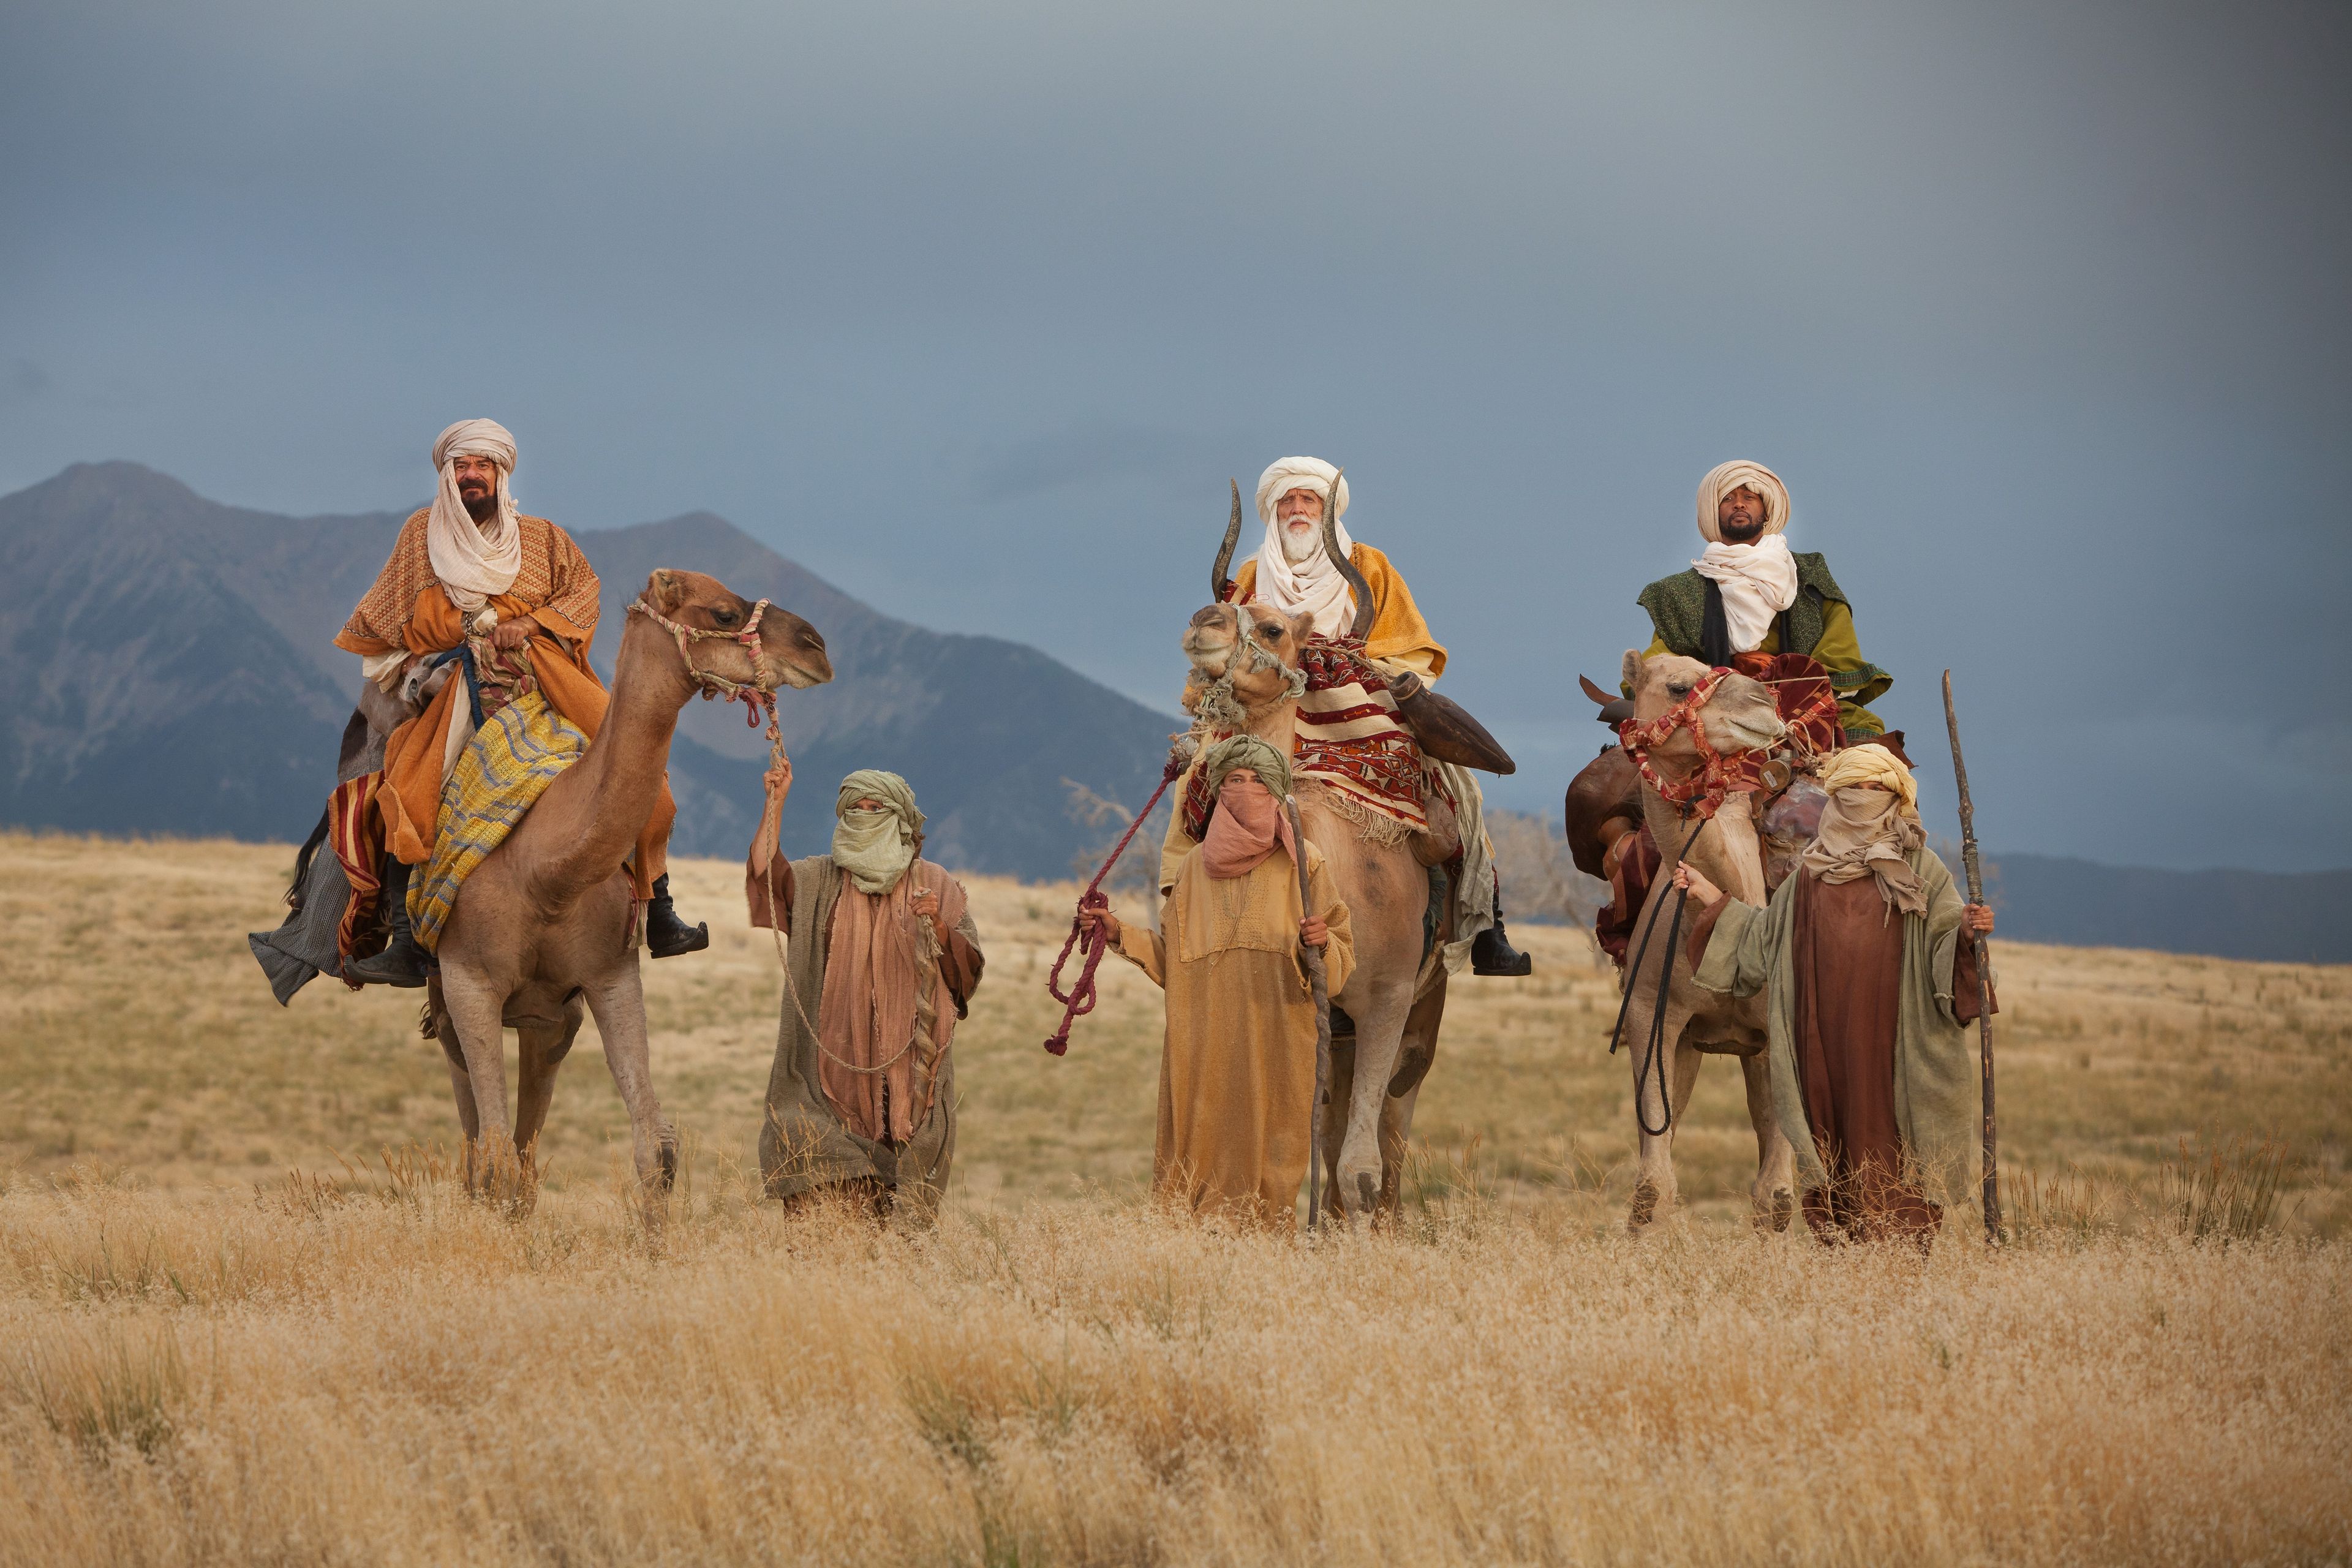 The Wise Men travel in search of baby Jesus.